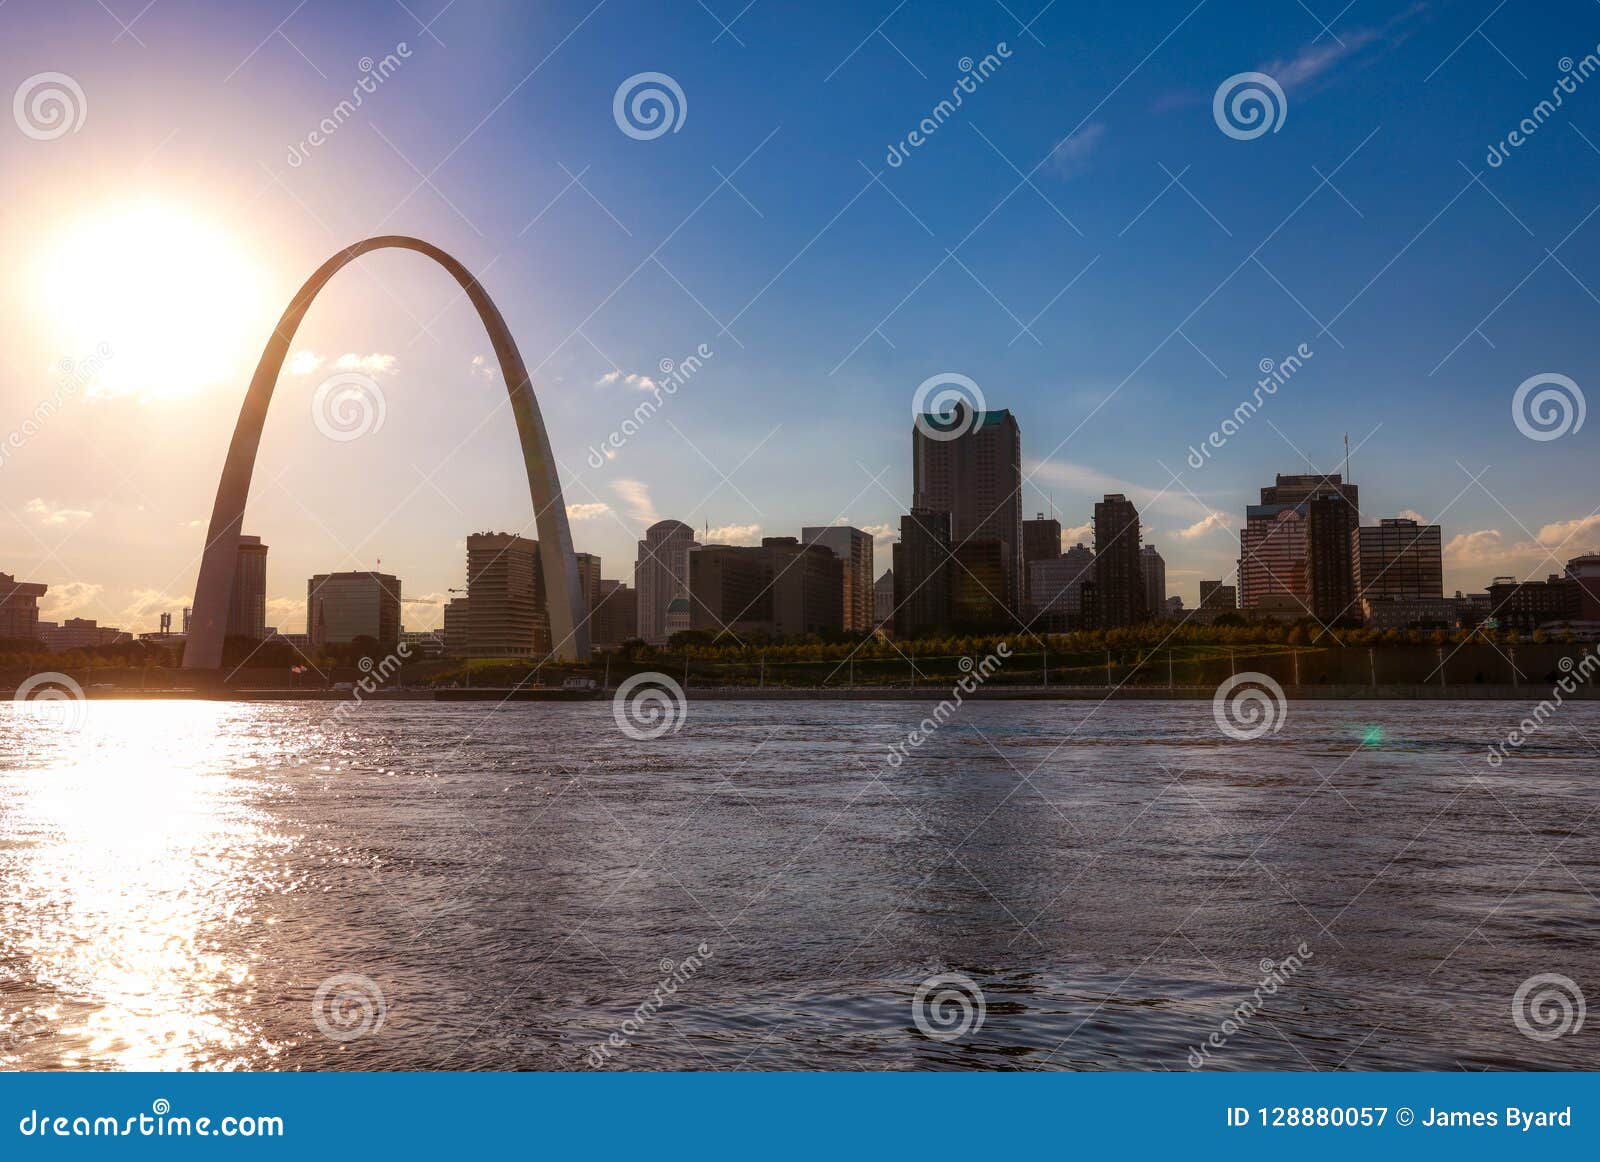 St. Louis, Missouri Skyline Across The Mississippi River Stock Image - Image of louis, river ...